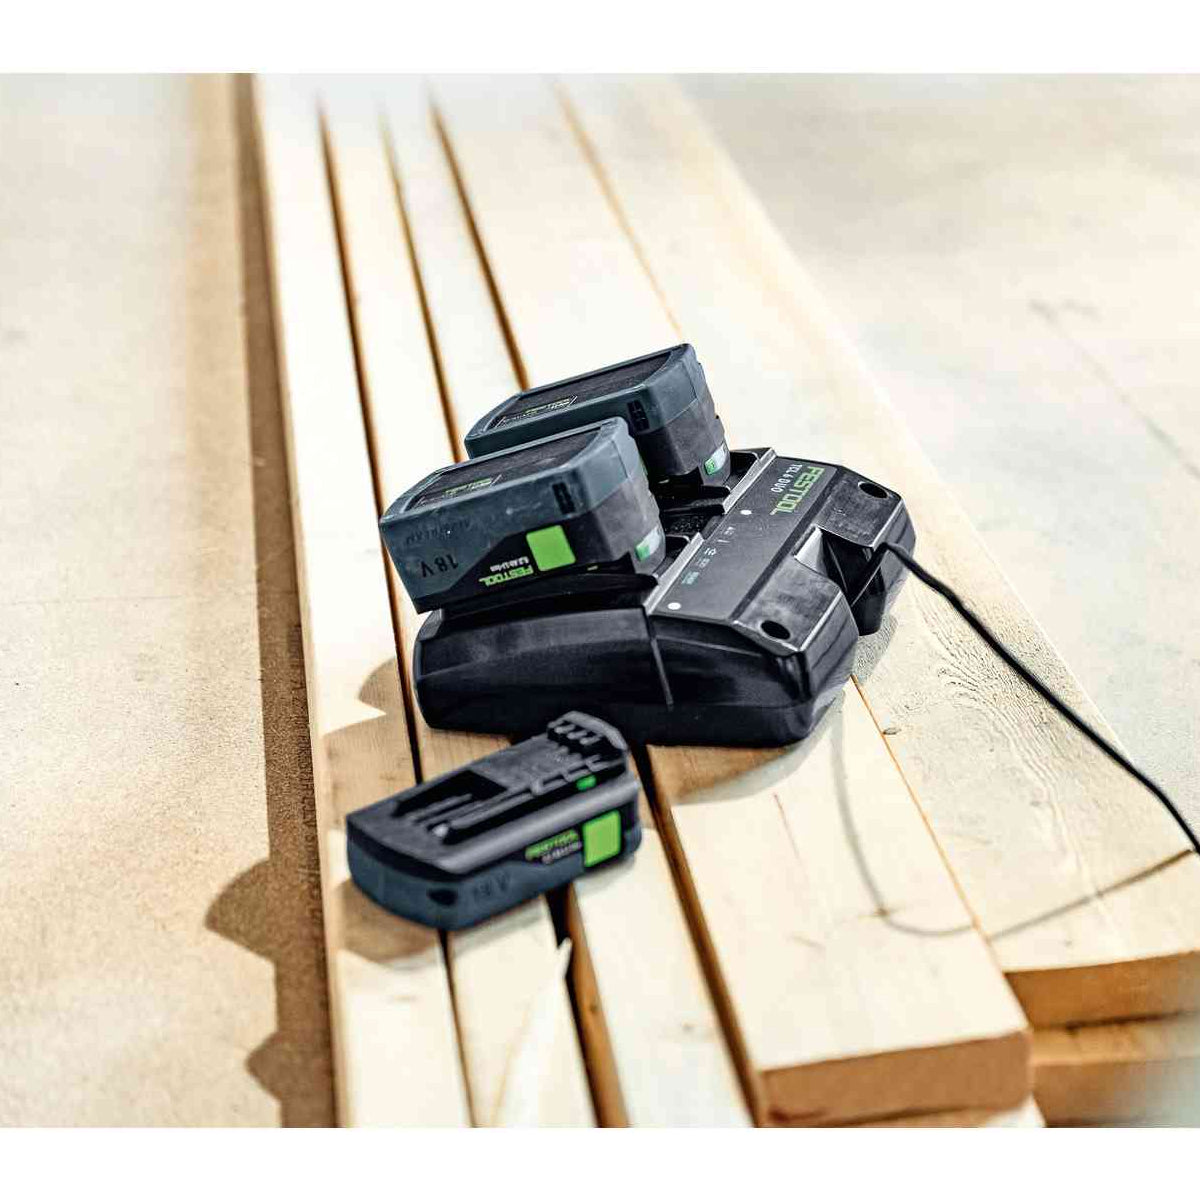 Festool 577019 TCL 6 DUO Rapid charger 230V